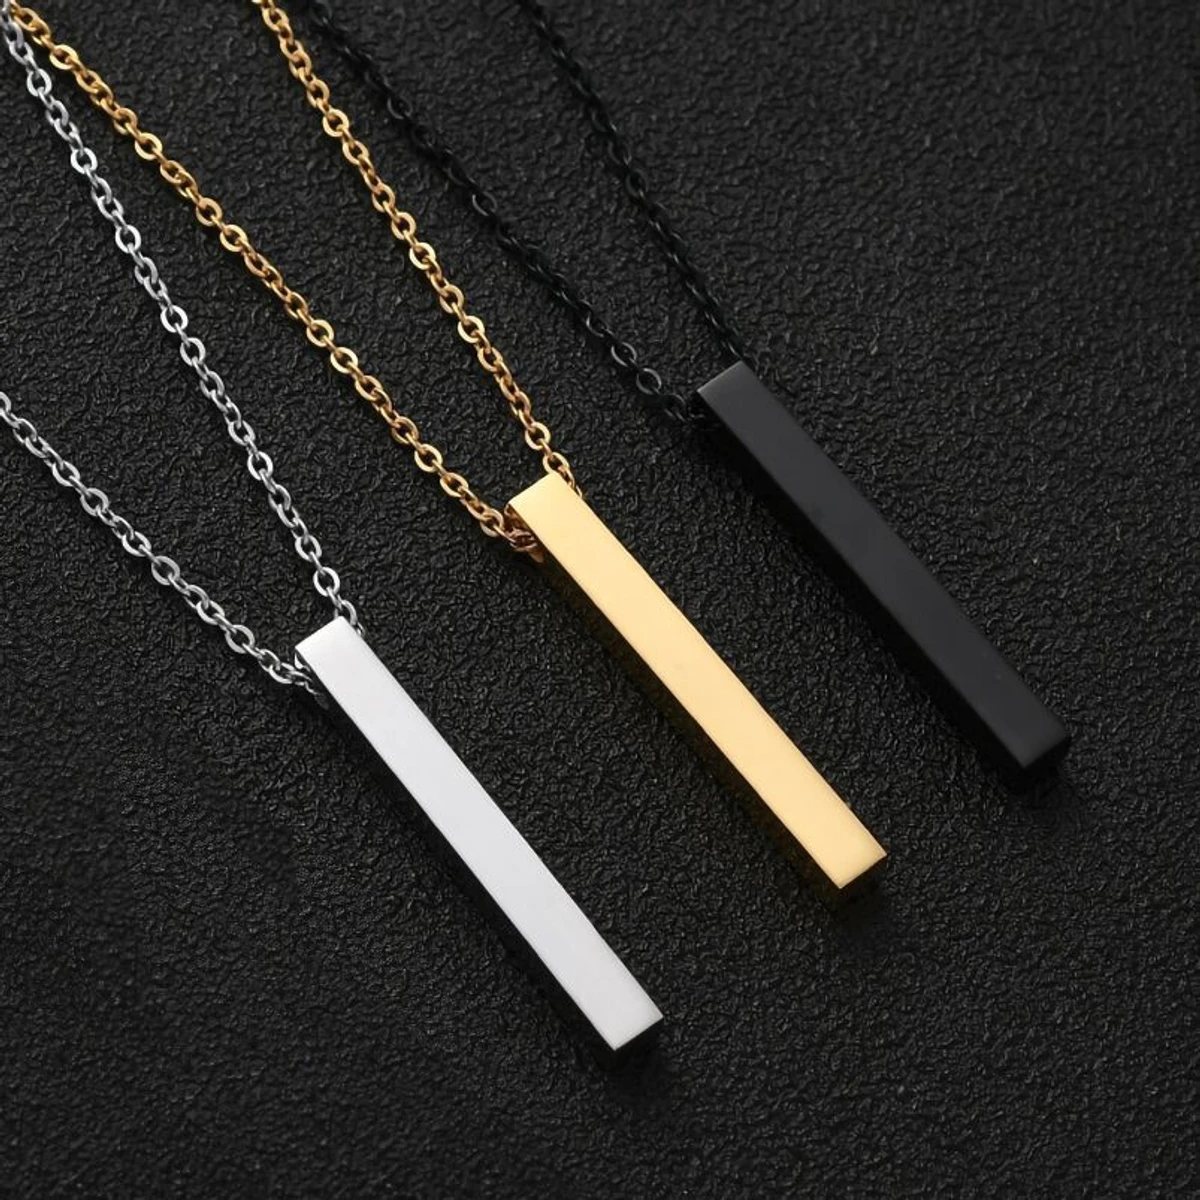 Fashionable Geometric New Fashion Necklace For Men